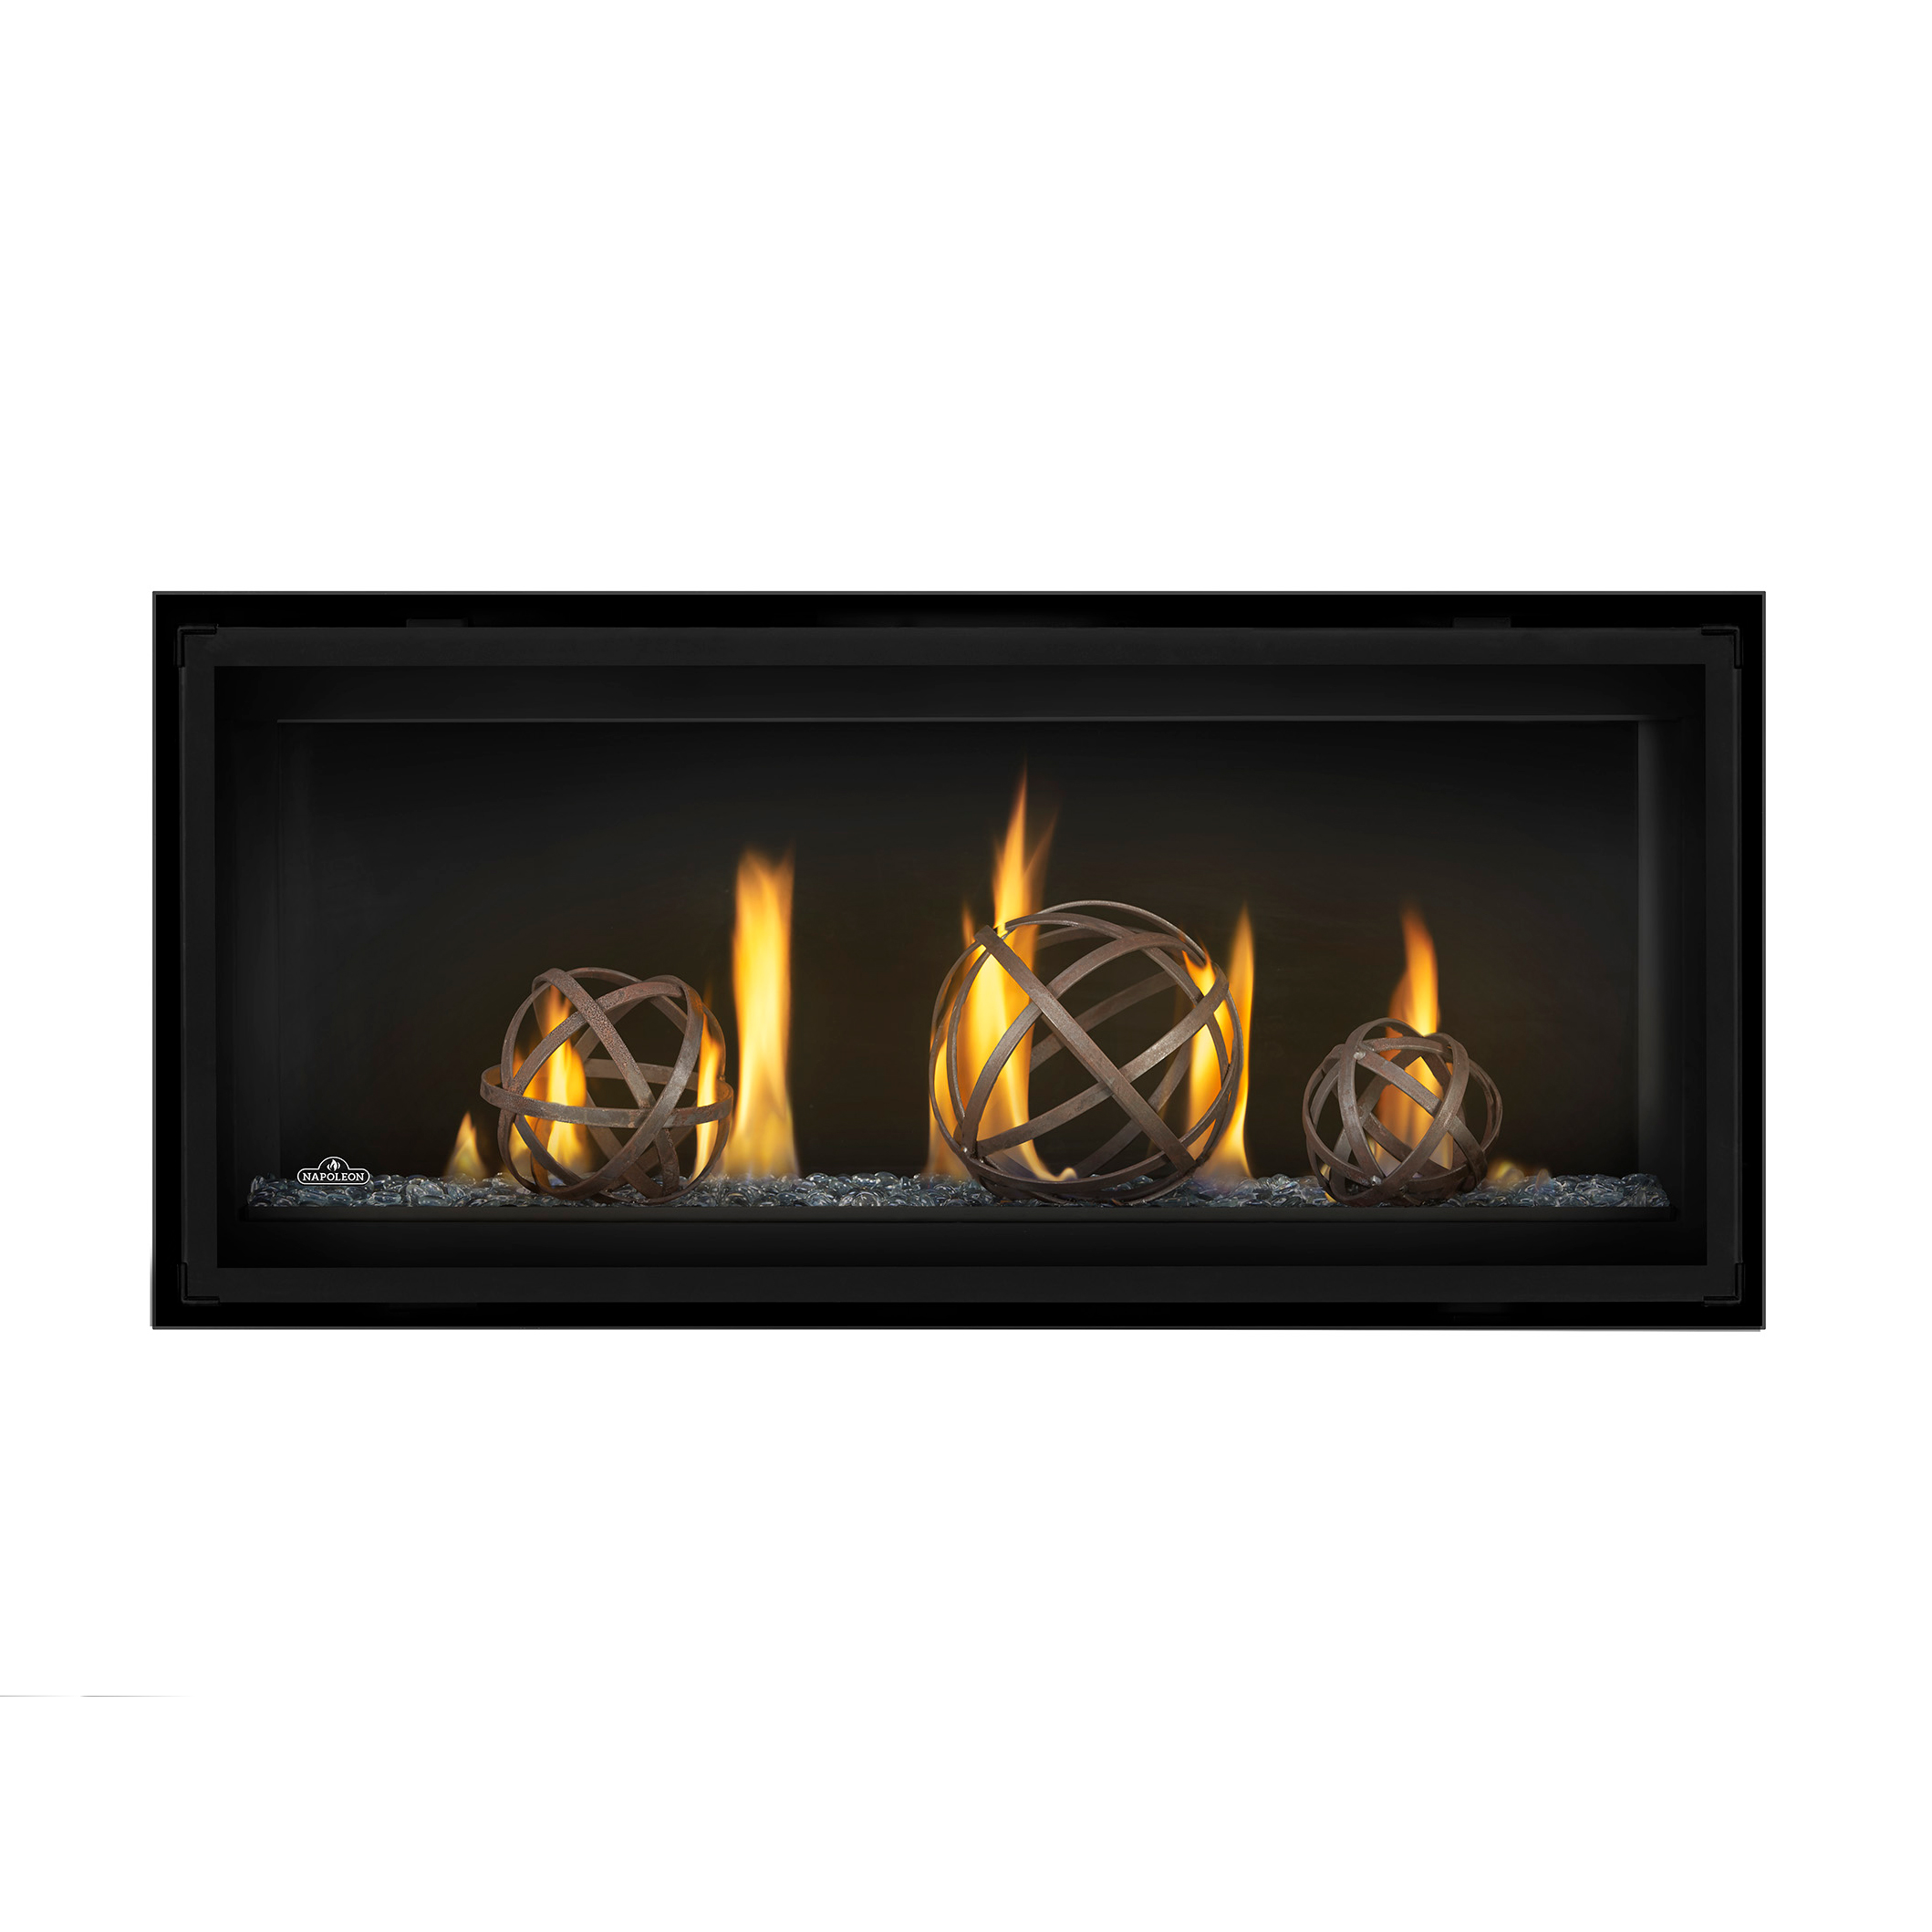 image of the fireplace Luxuria lvx38nx